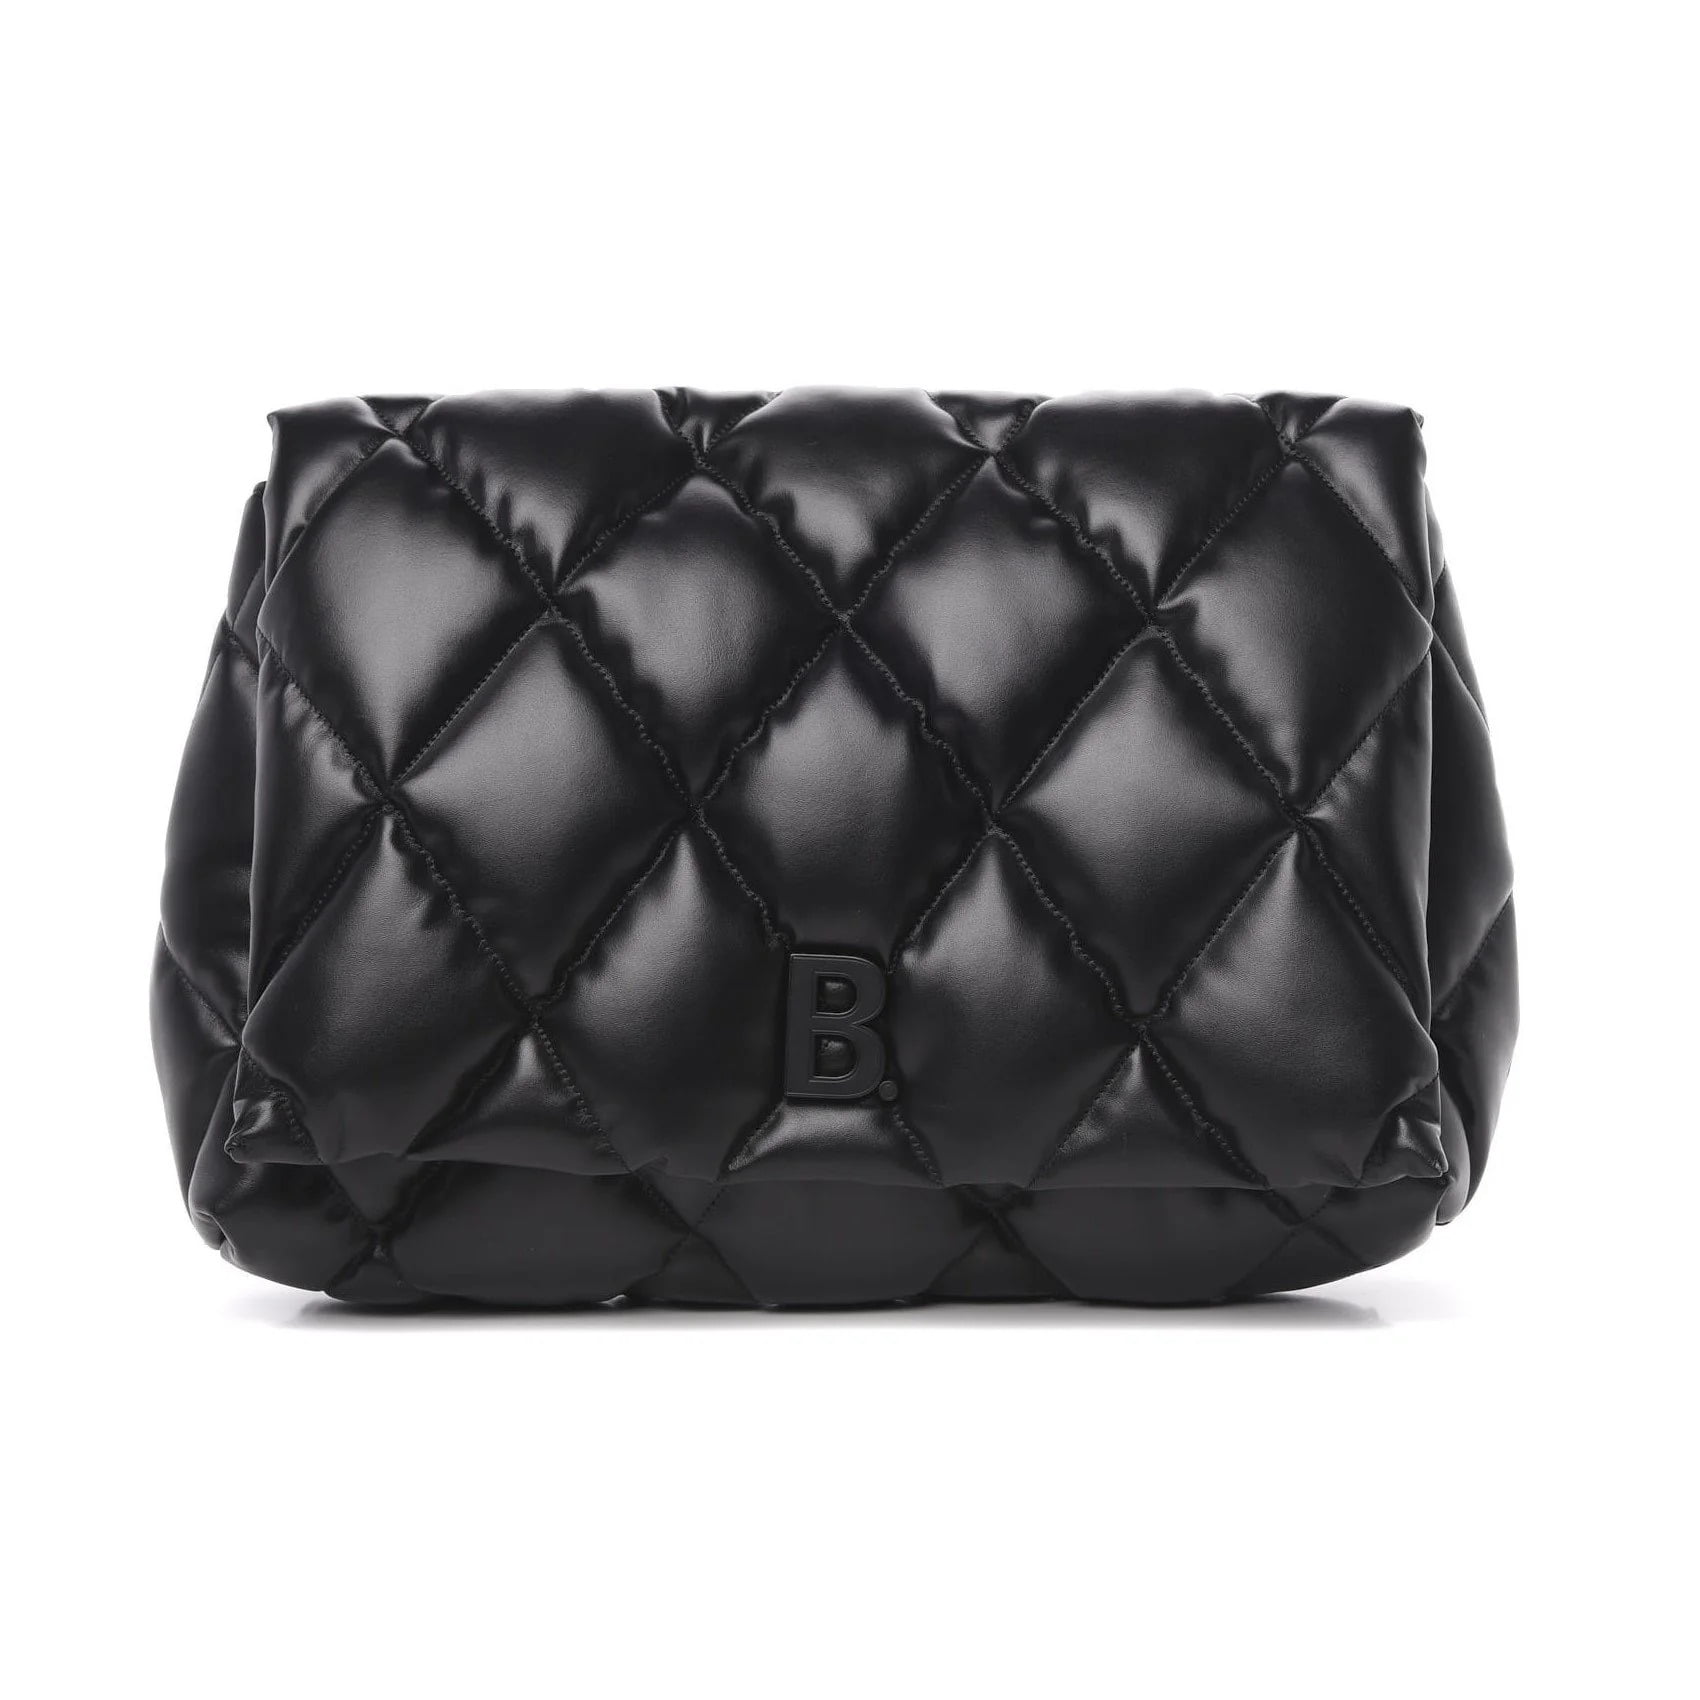 Touch Puffy leather handbag